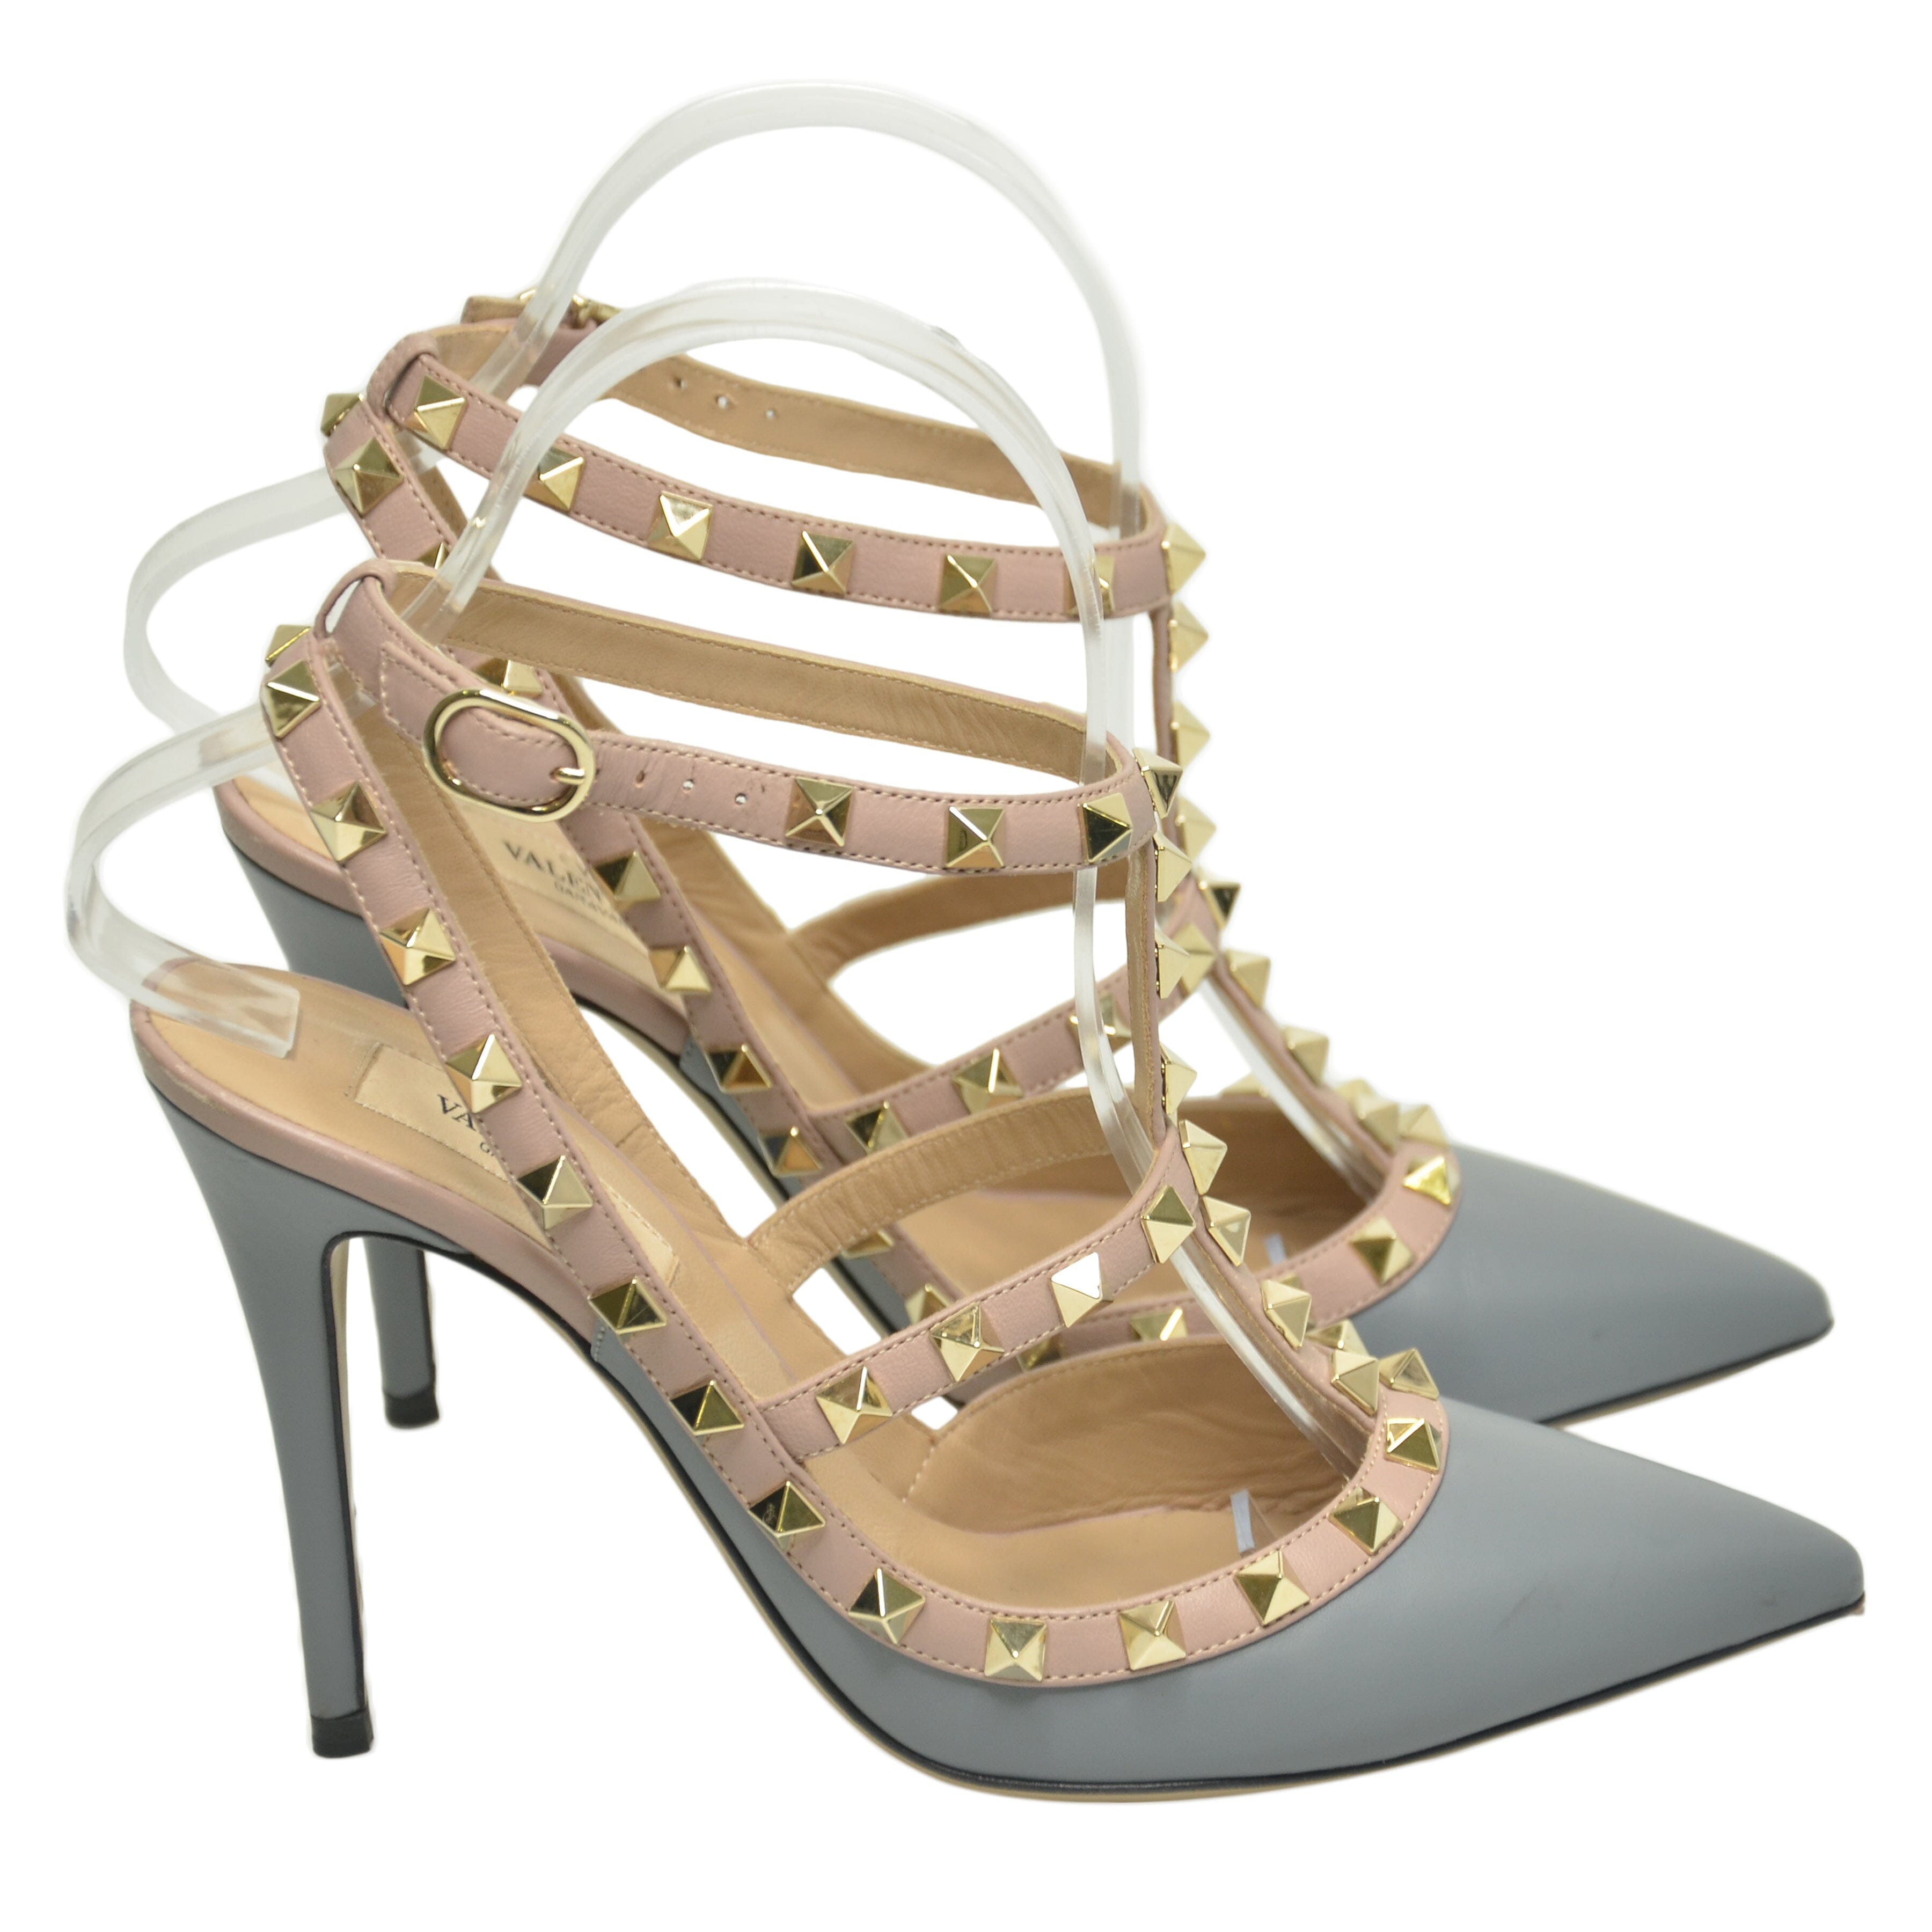 Light Grey Rockstud Pointed Toe Ankle Strap Pumps Shoes Valentino